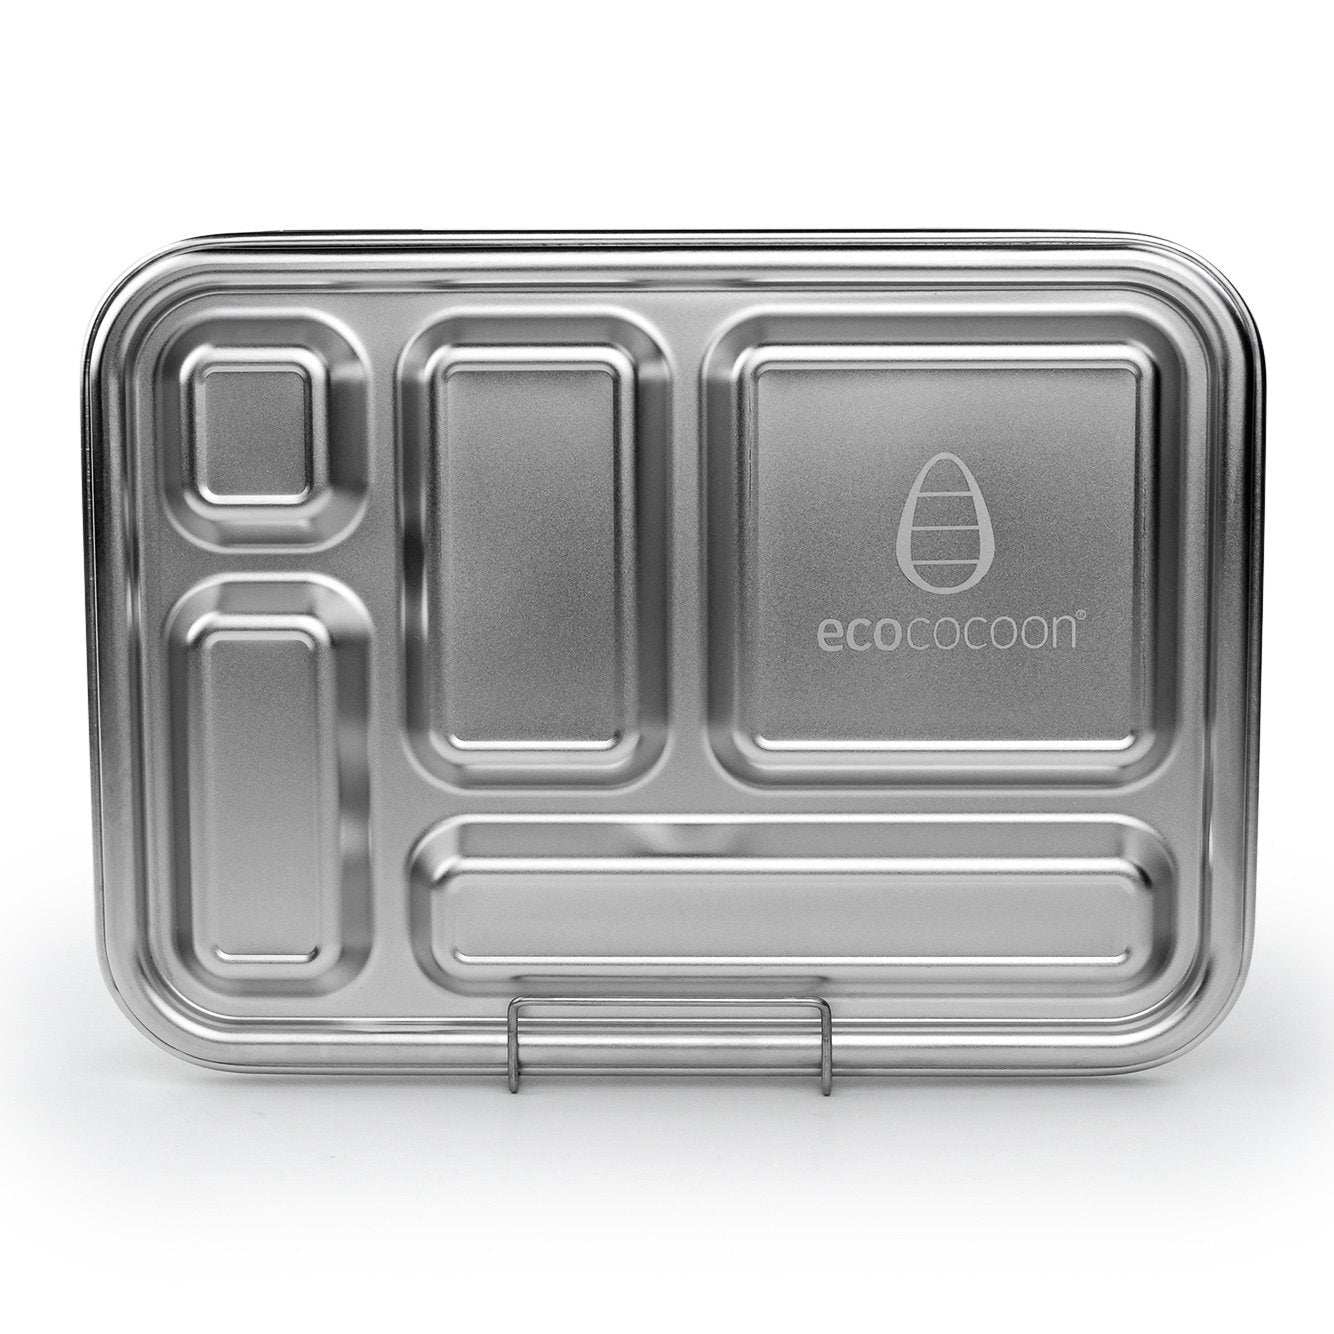 Ecococoon Stainless Steel Leakproof Bento Box - 5 compartment - Pink Rose